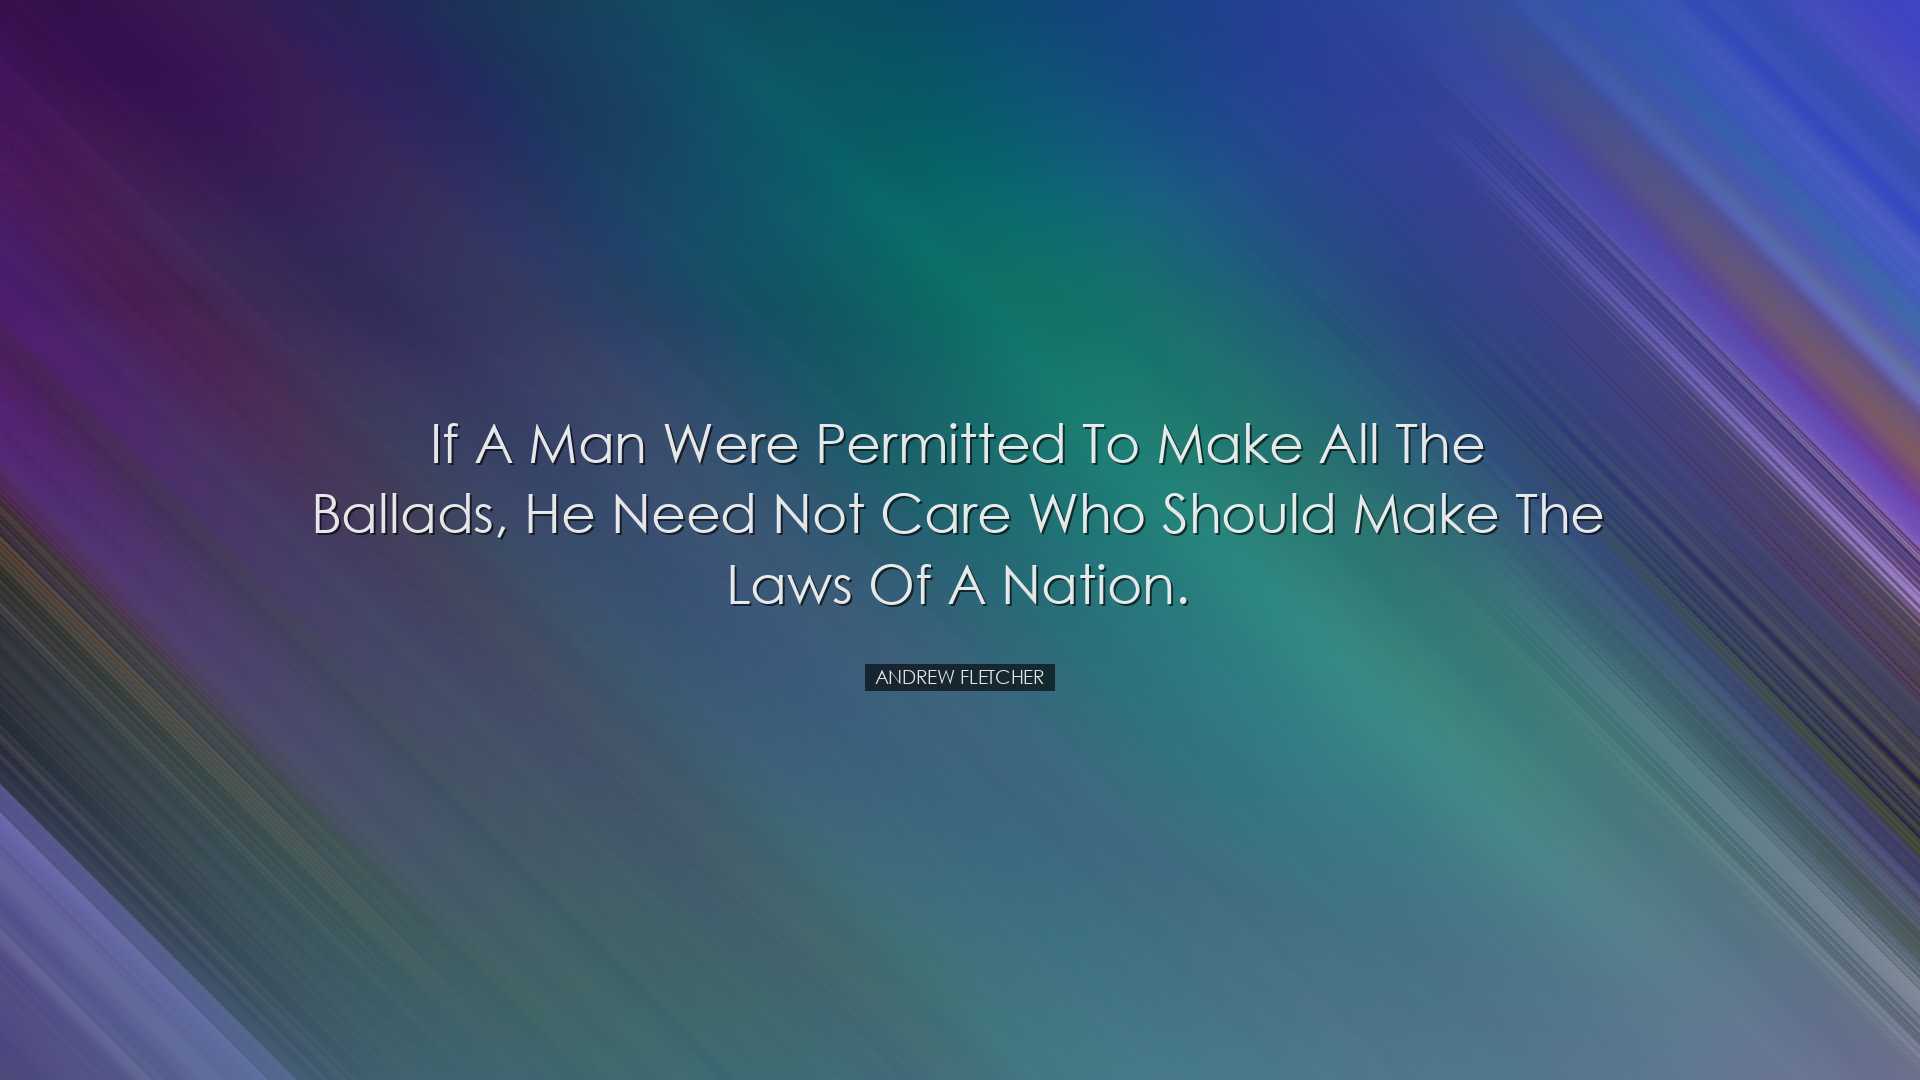 If a man were permitted to make all the ballads, he need not care